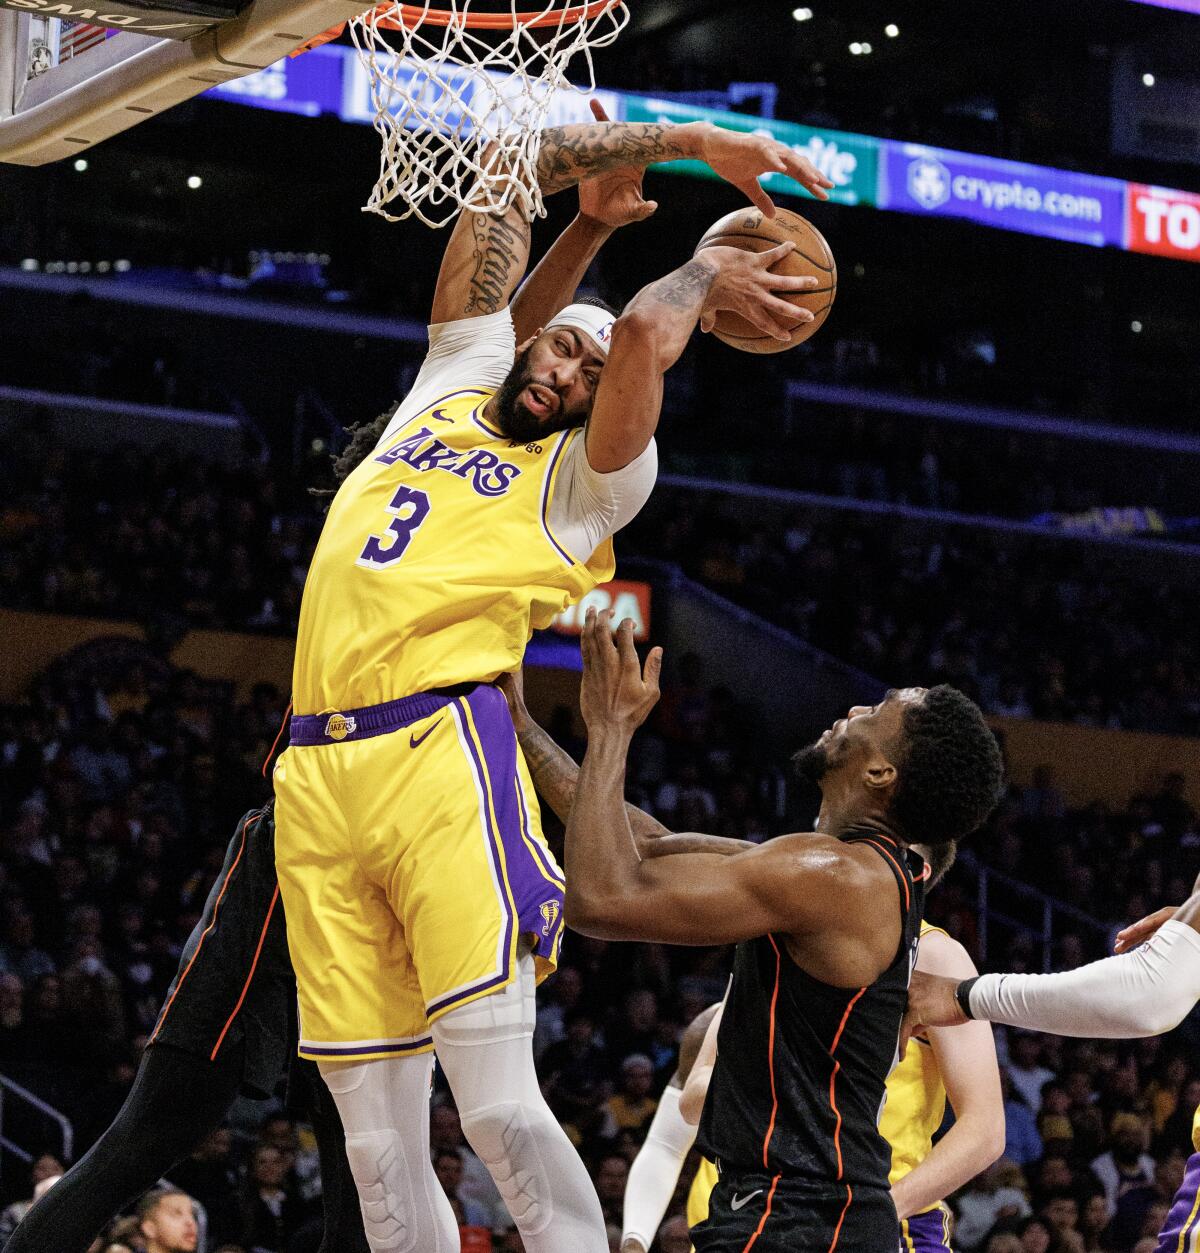 Lakers forward Anthony Davis gets an inside position on a defensive rebound against Shake Milton in the first half.